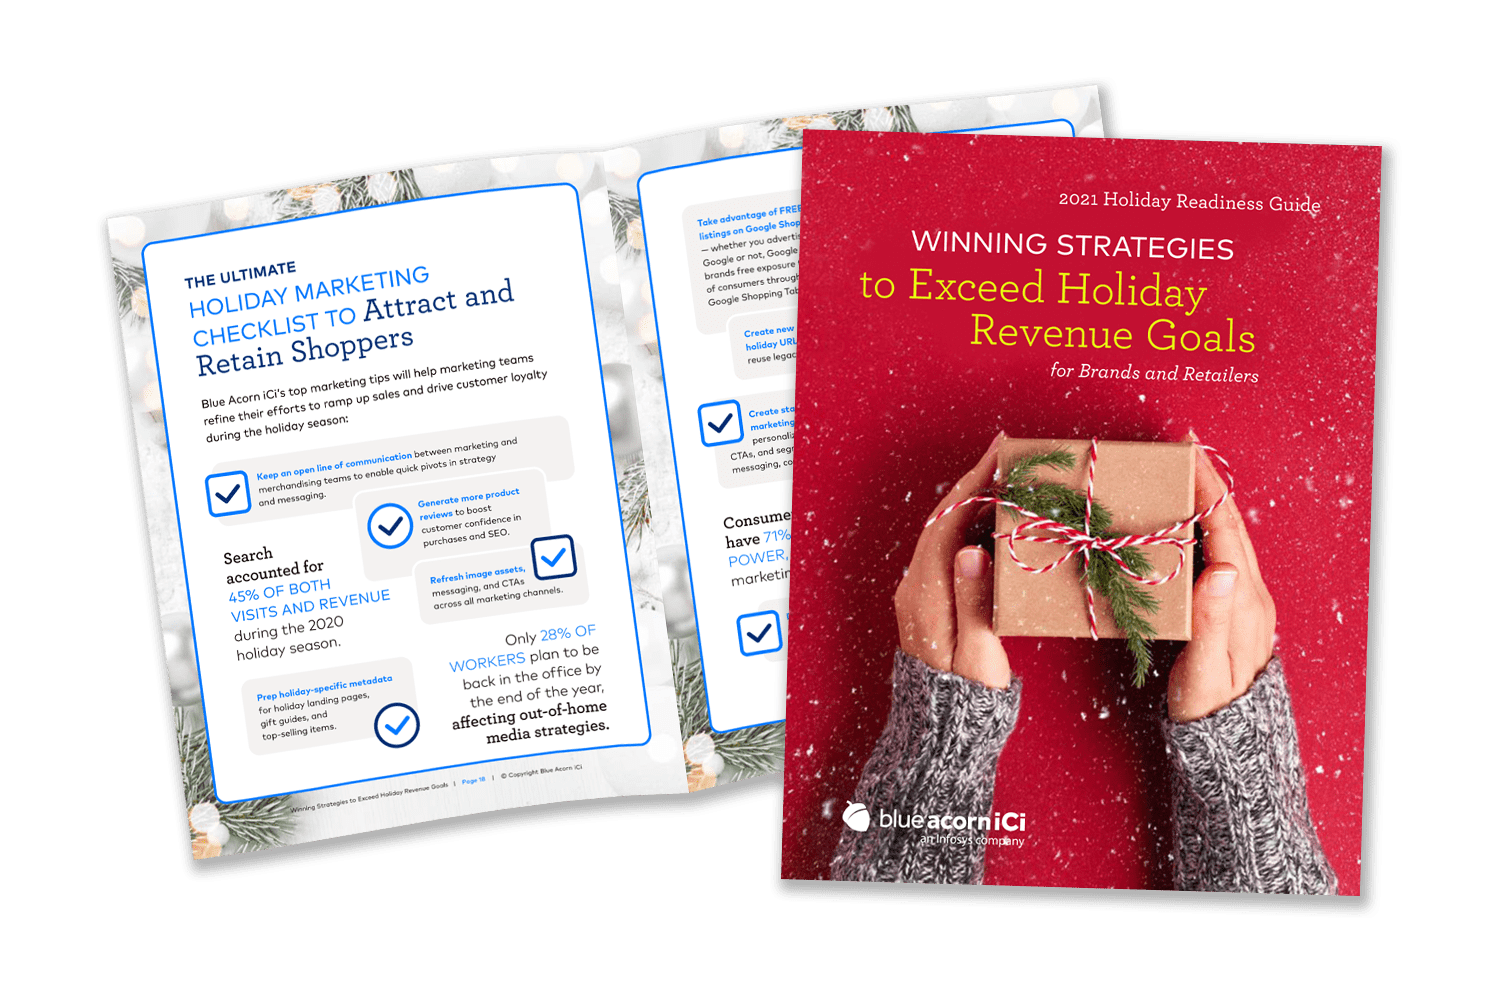 Download the Holiday Guide!